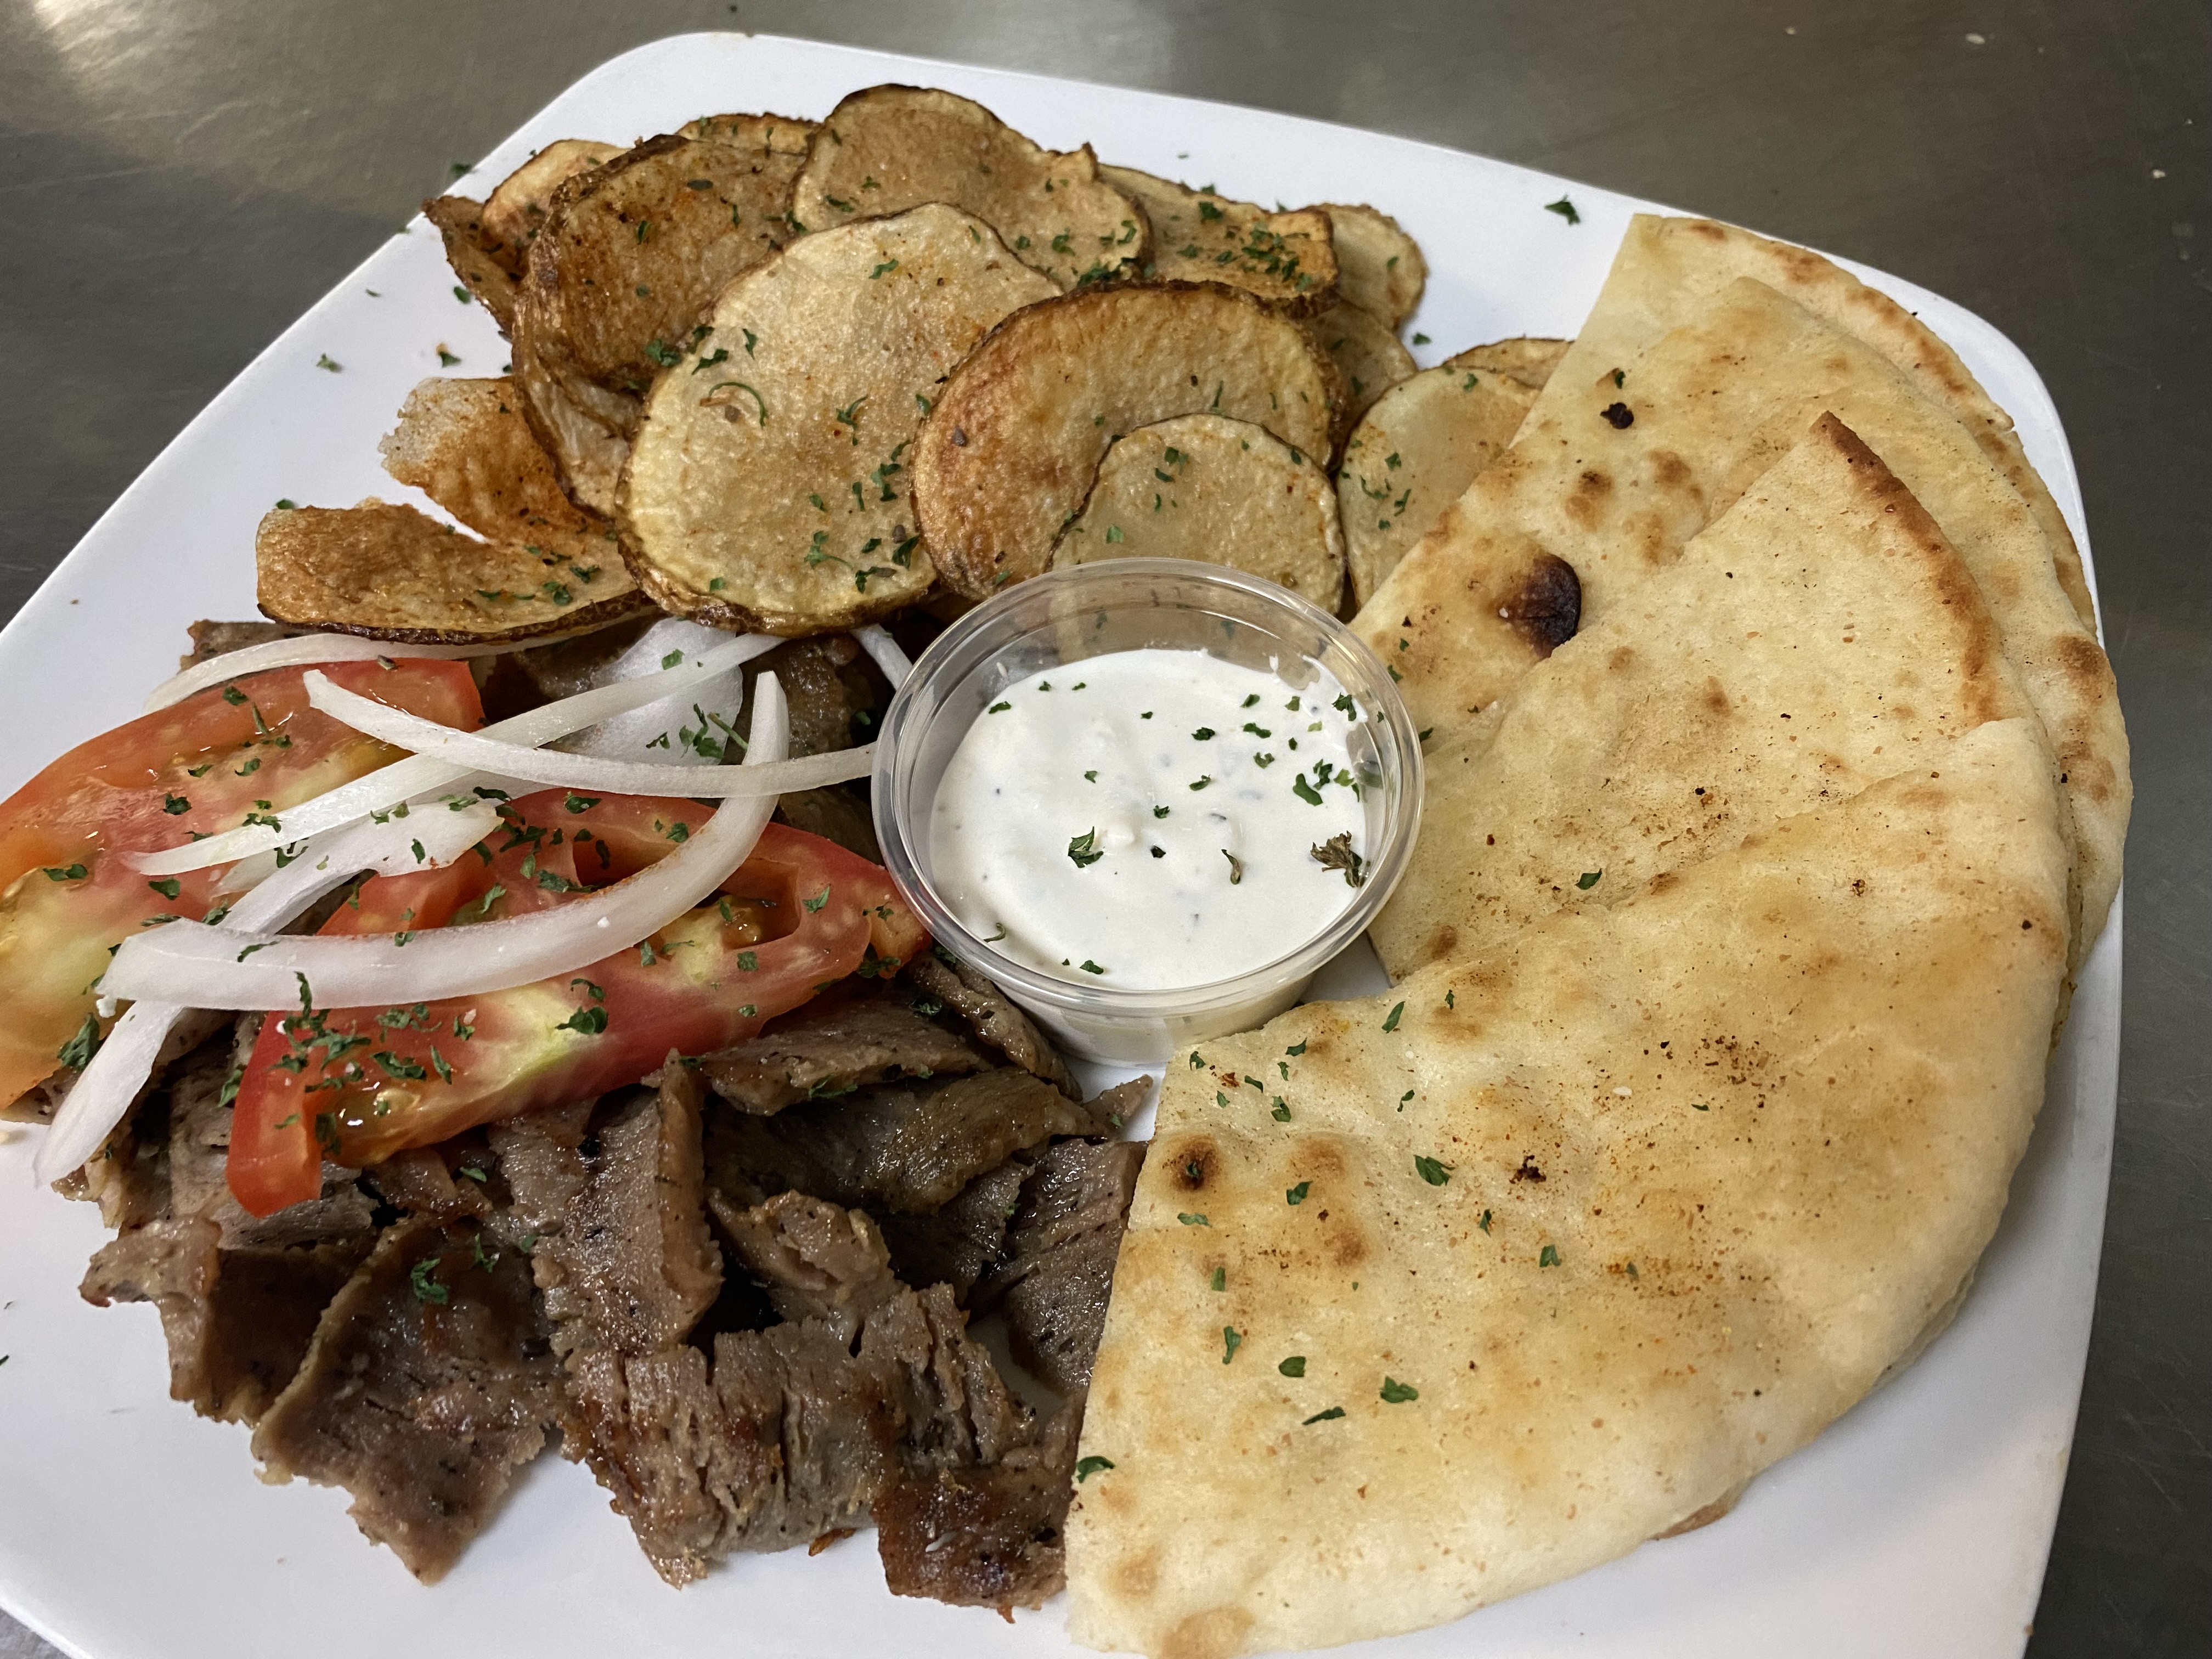 Gyro Plate (L) - Lunch - The Olive Tree Restaurant - Villa Rica